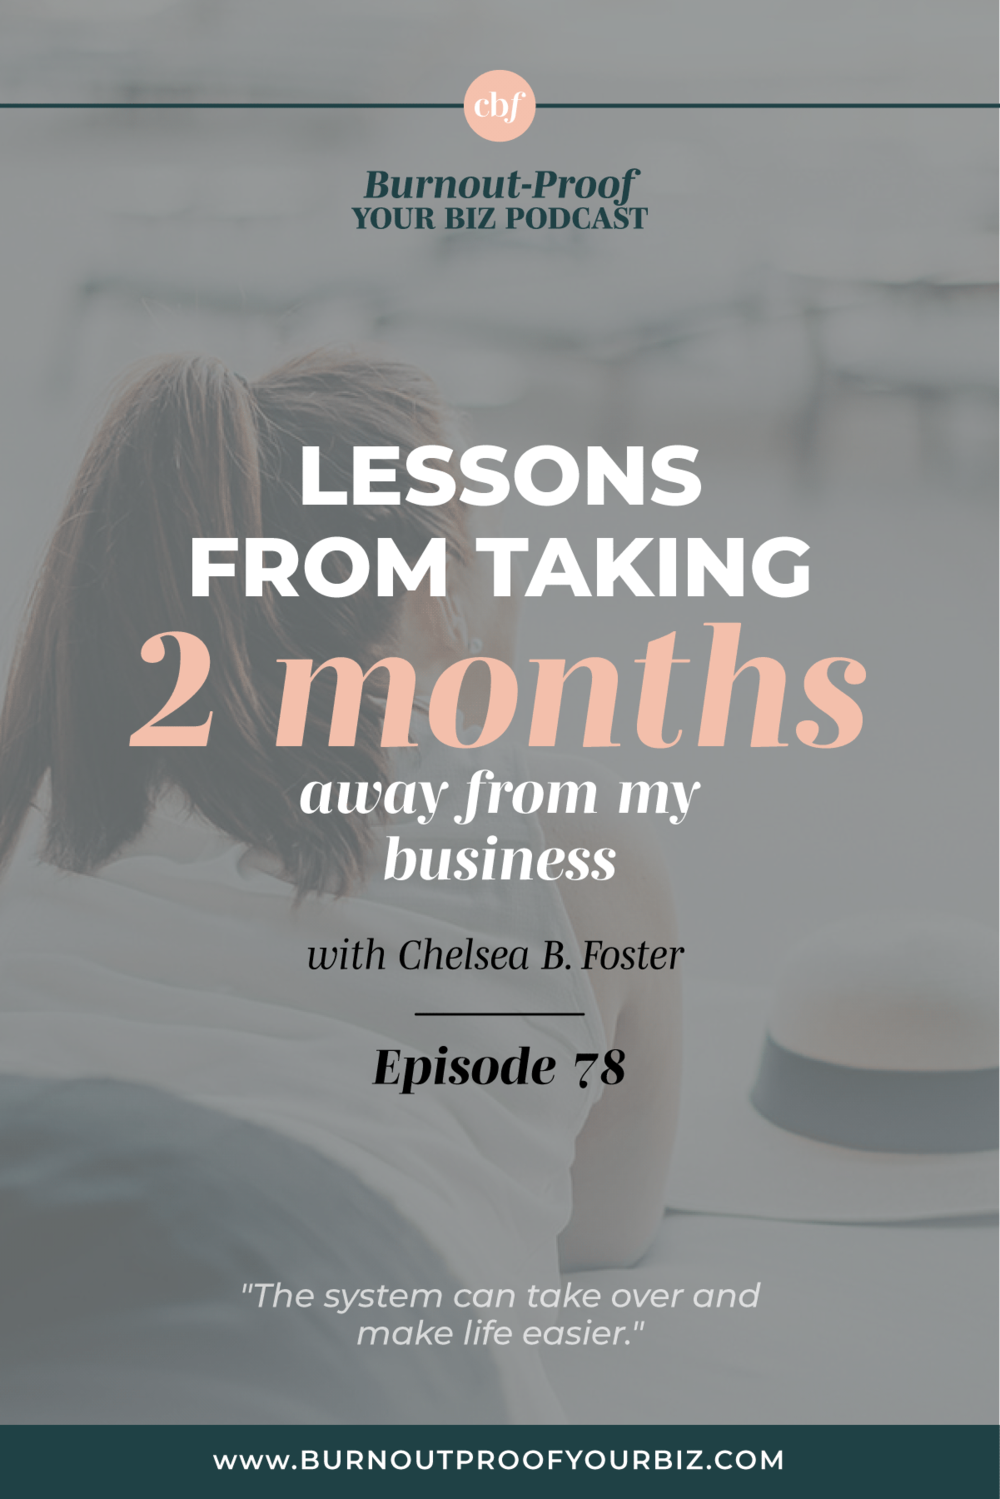 Burnout-Proof Your Biz Podcast with Chelsea B Foster | Episode 078 - Lesson from Taking TWO Months Away from My Business 